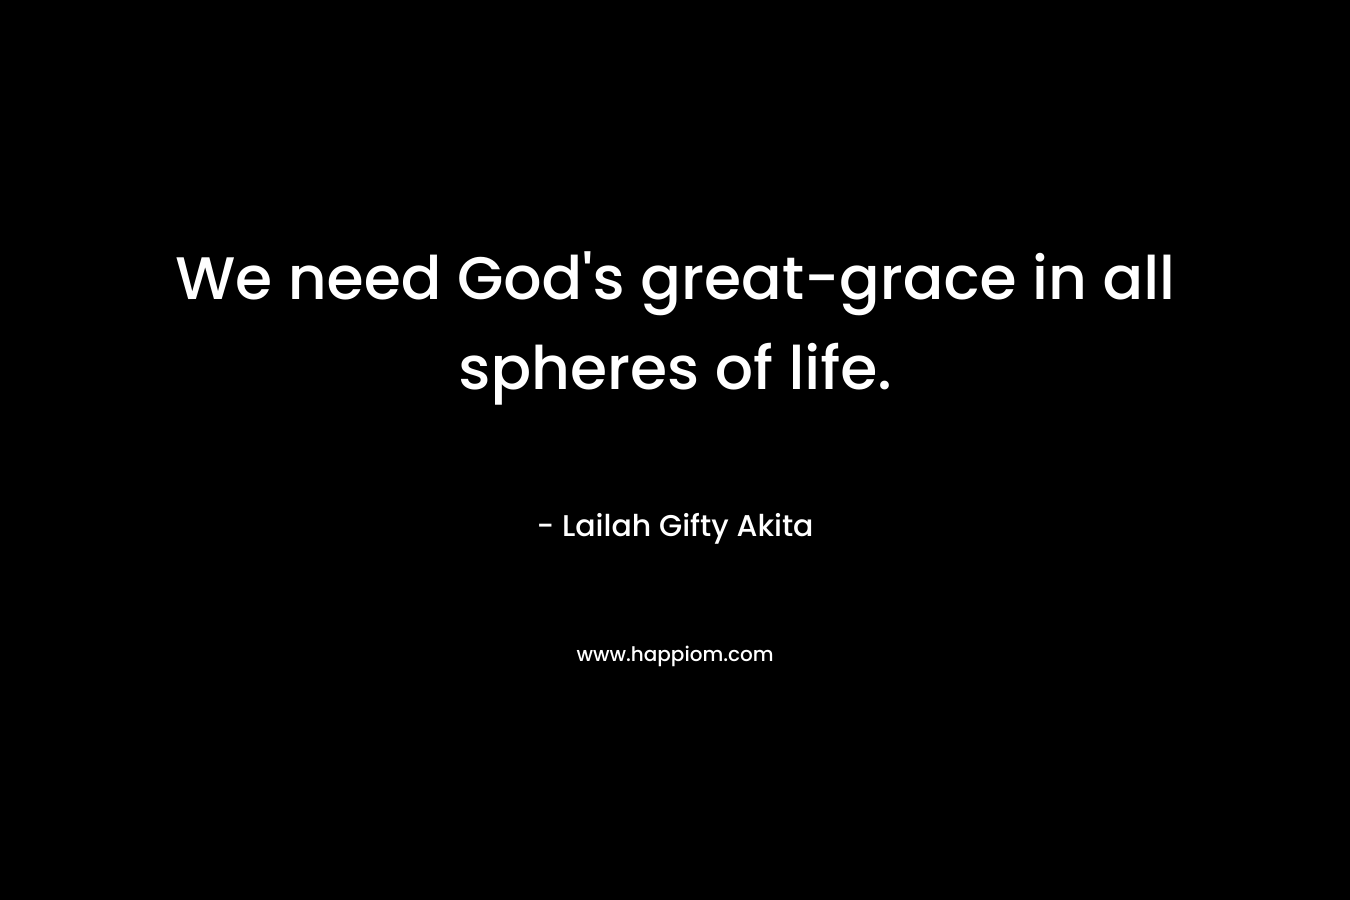 We need God's great-grace in all spheres of life.